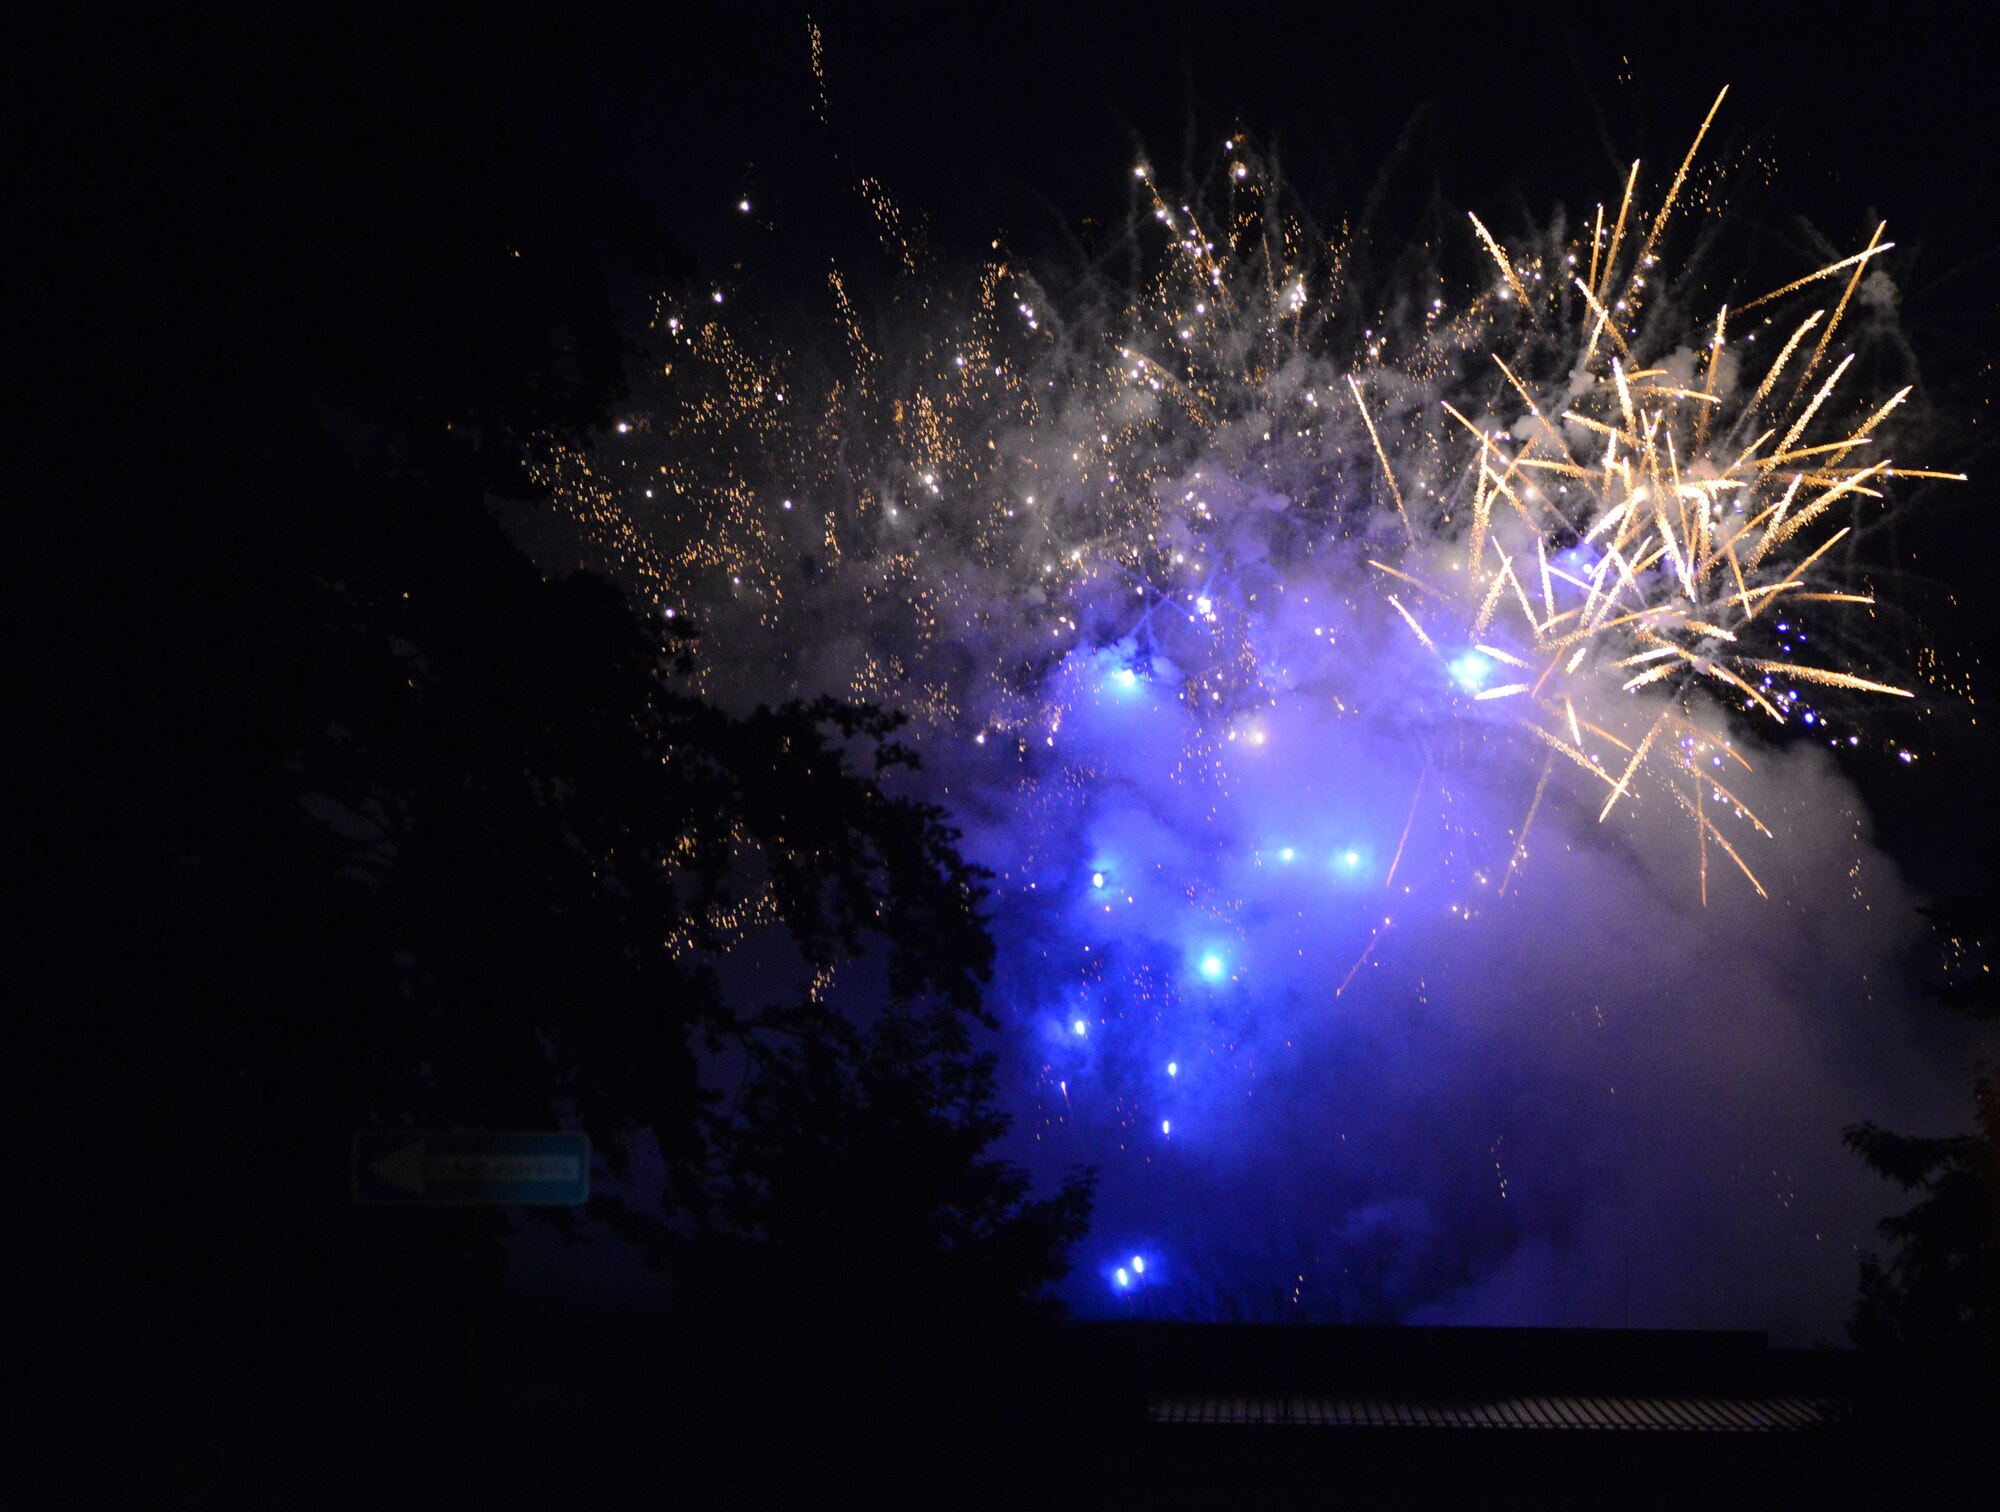 Fireworks explode during Freedom Fest 2016 at Ramstein Air Base, Germany, July 4, 2016. The Independence Day celebration included a variety of foods, games, rides and fireworks for Kaiserslautern Military Community members. (U.S. Air Force photo/ Airman 1st Class Joshua Magbanua)